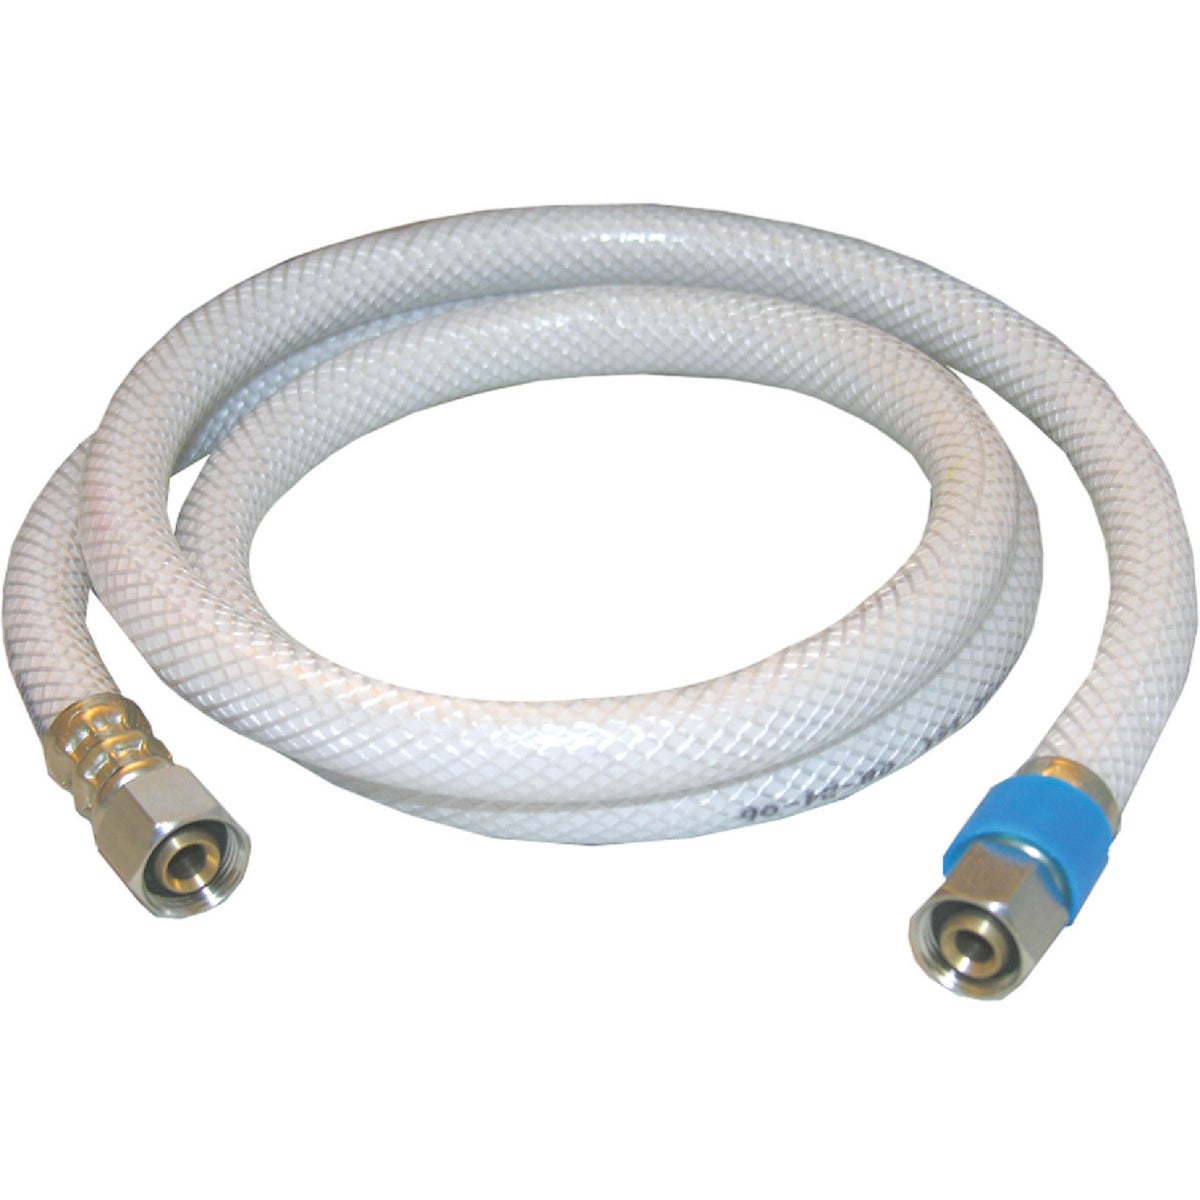 Lasco 3/8 In. C x 3/8 In. C x 36 In. L Braided Poly Vinyl Appliance Water Connector